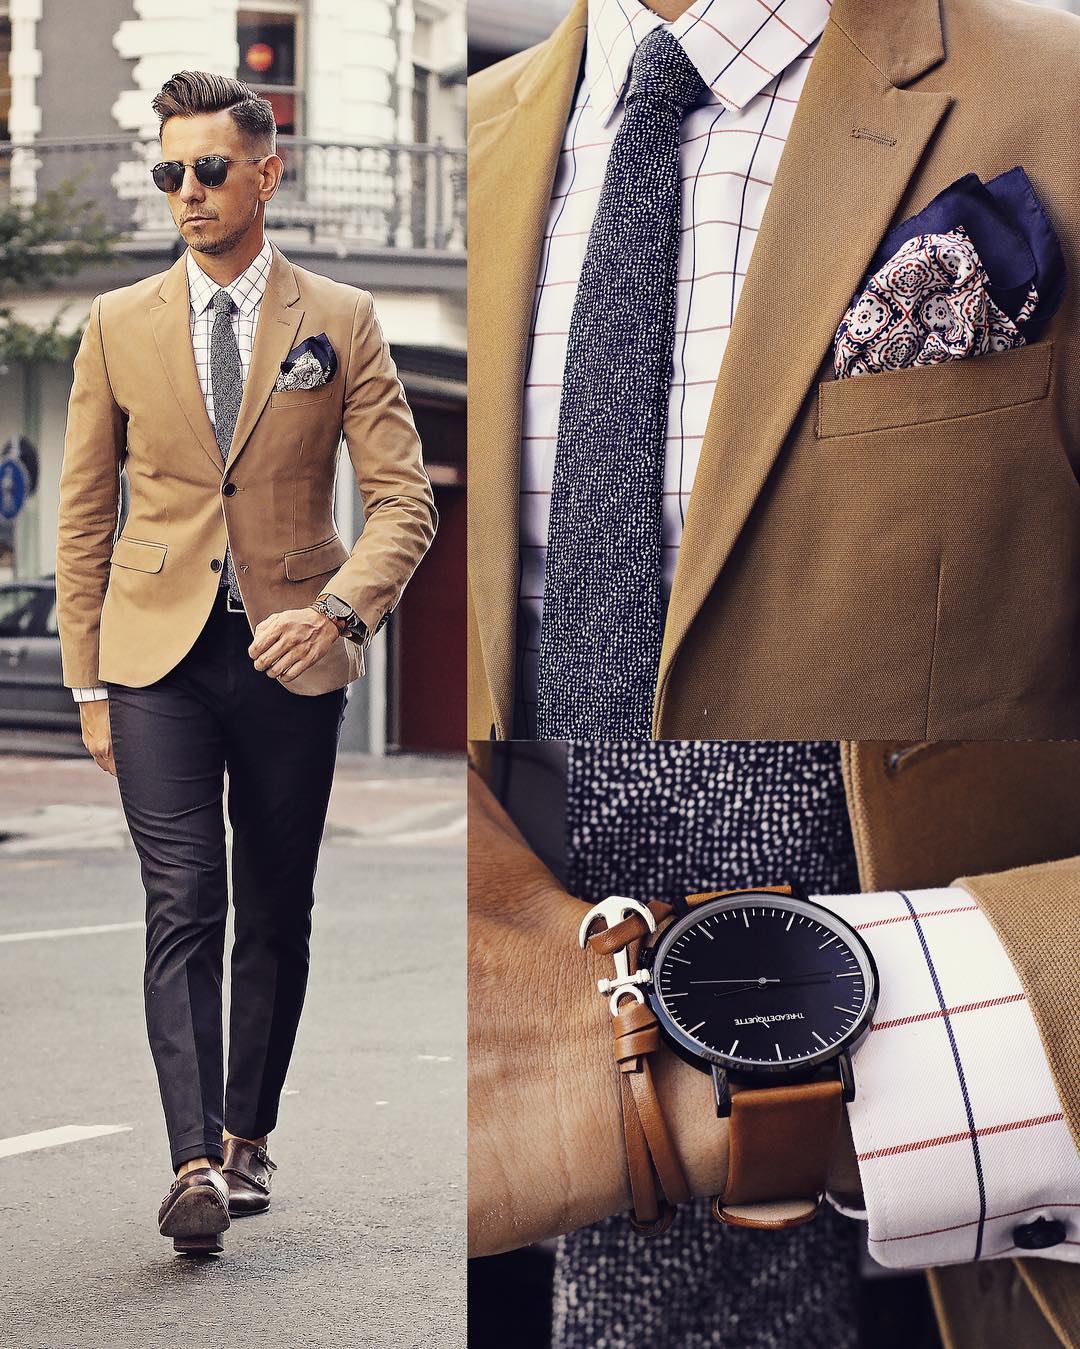 Suit , Pokect Square And Watch Combinations For Men